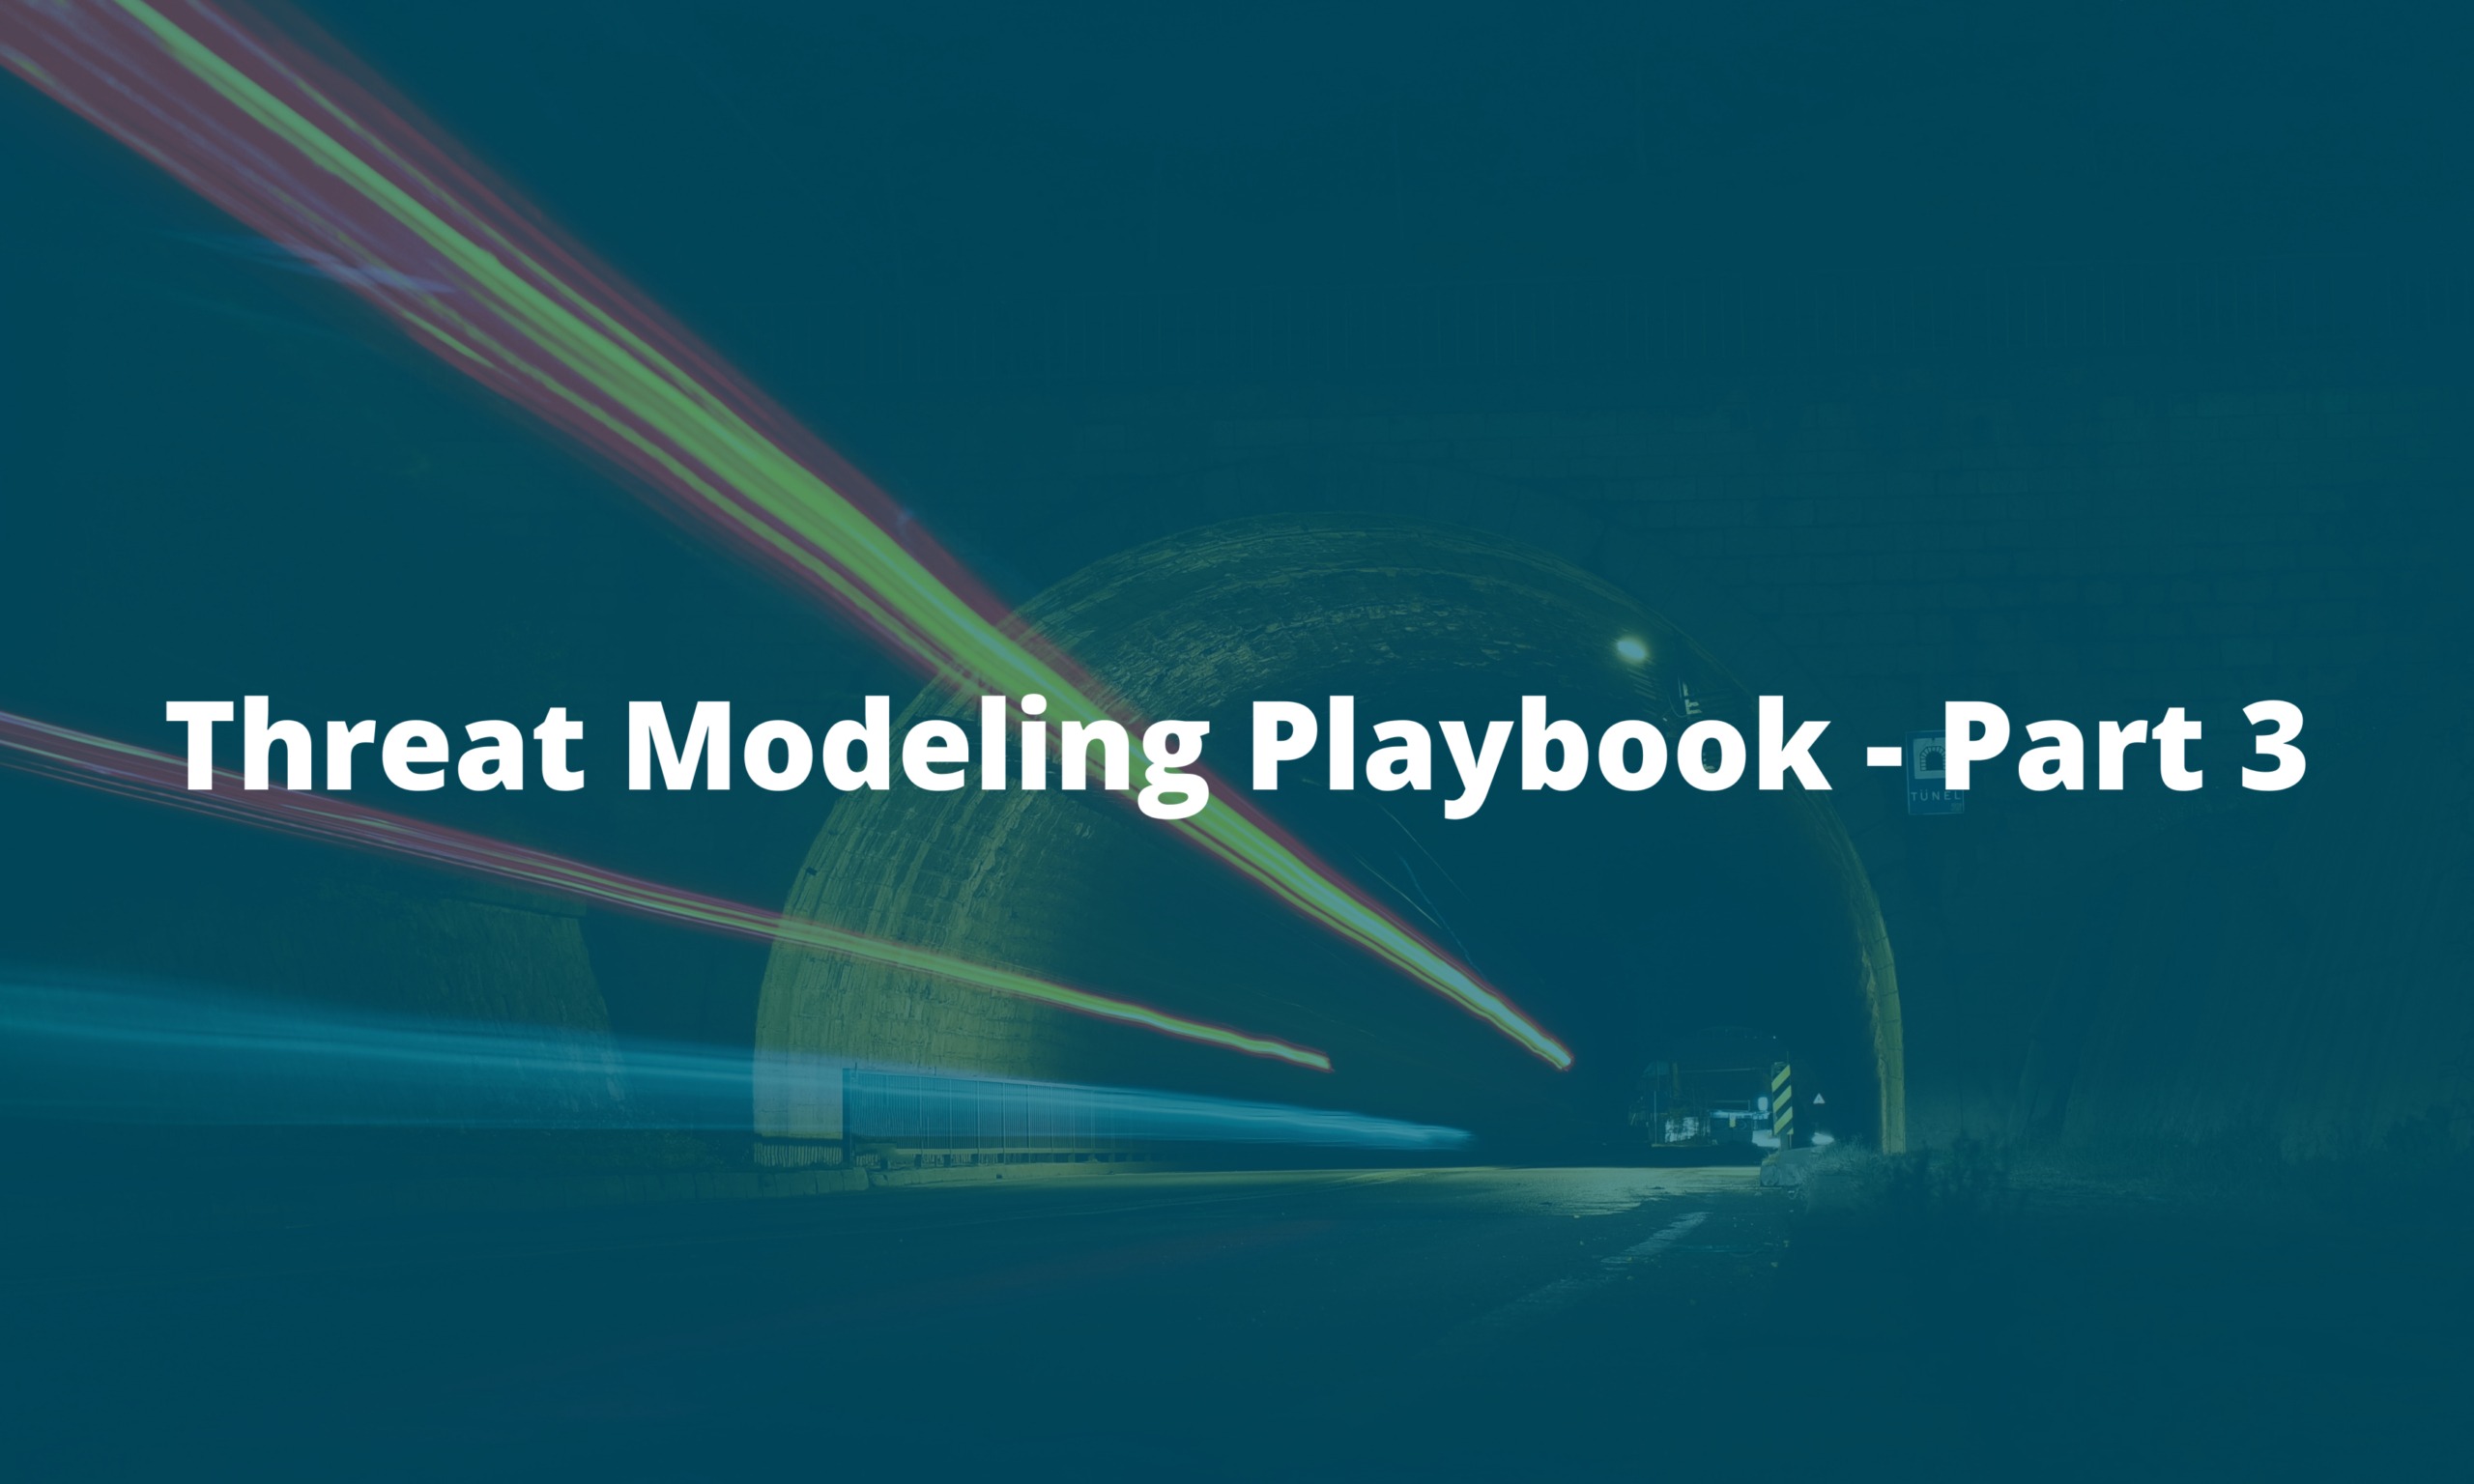 Threat Modeling Playbook – Part 3 Train your people to threat model